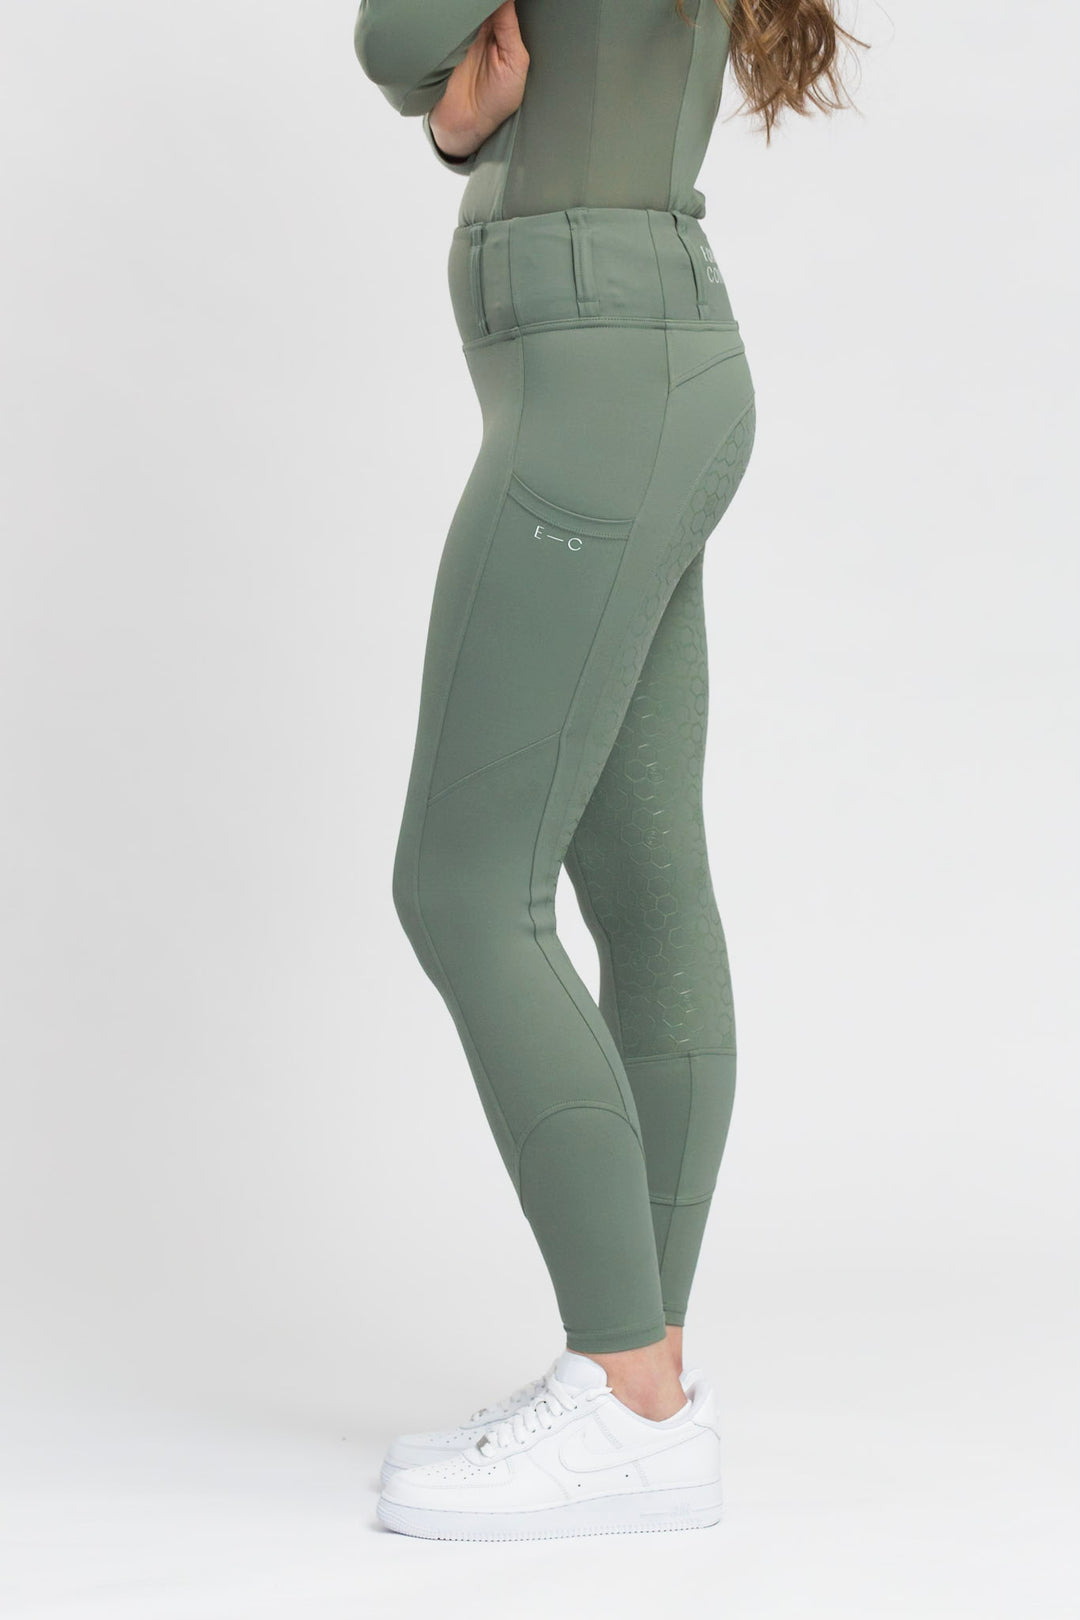 Honeycomb Technical Tights - Sage